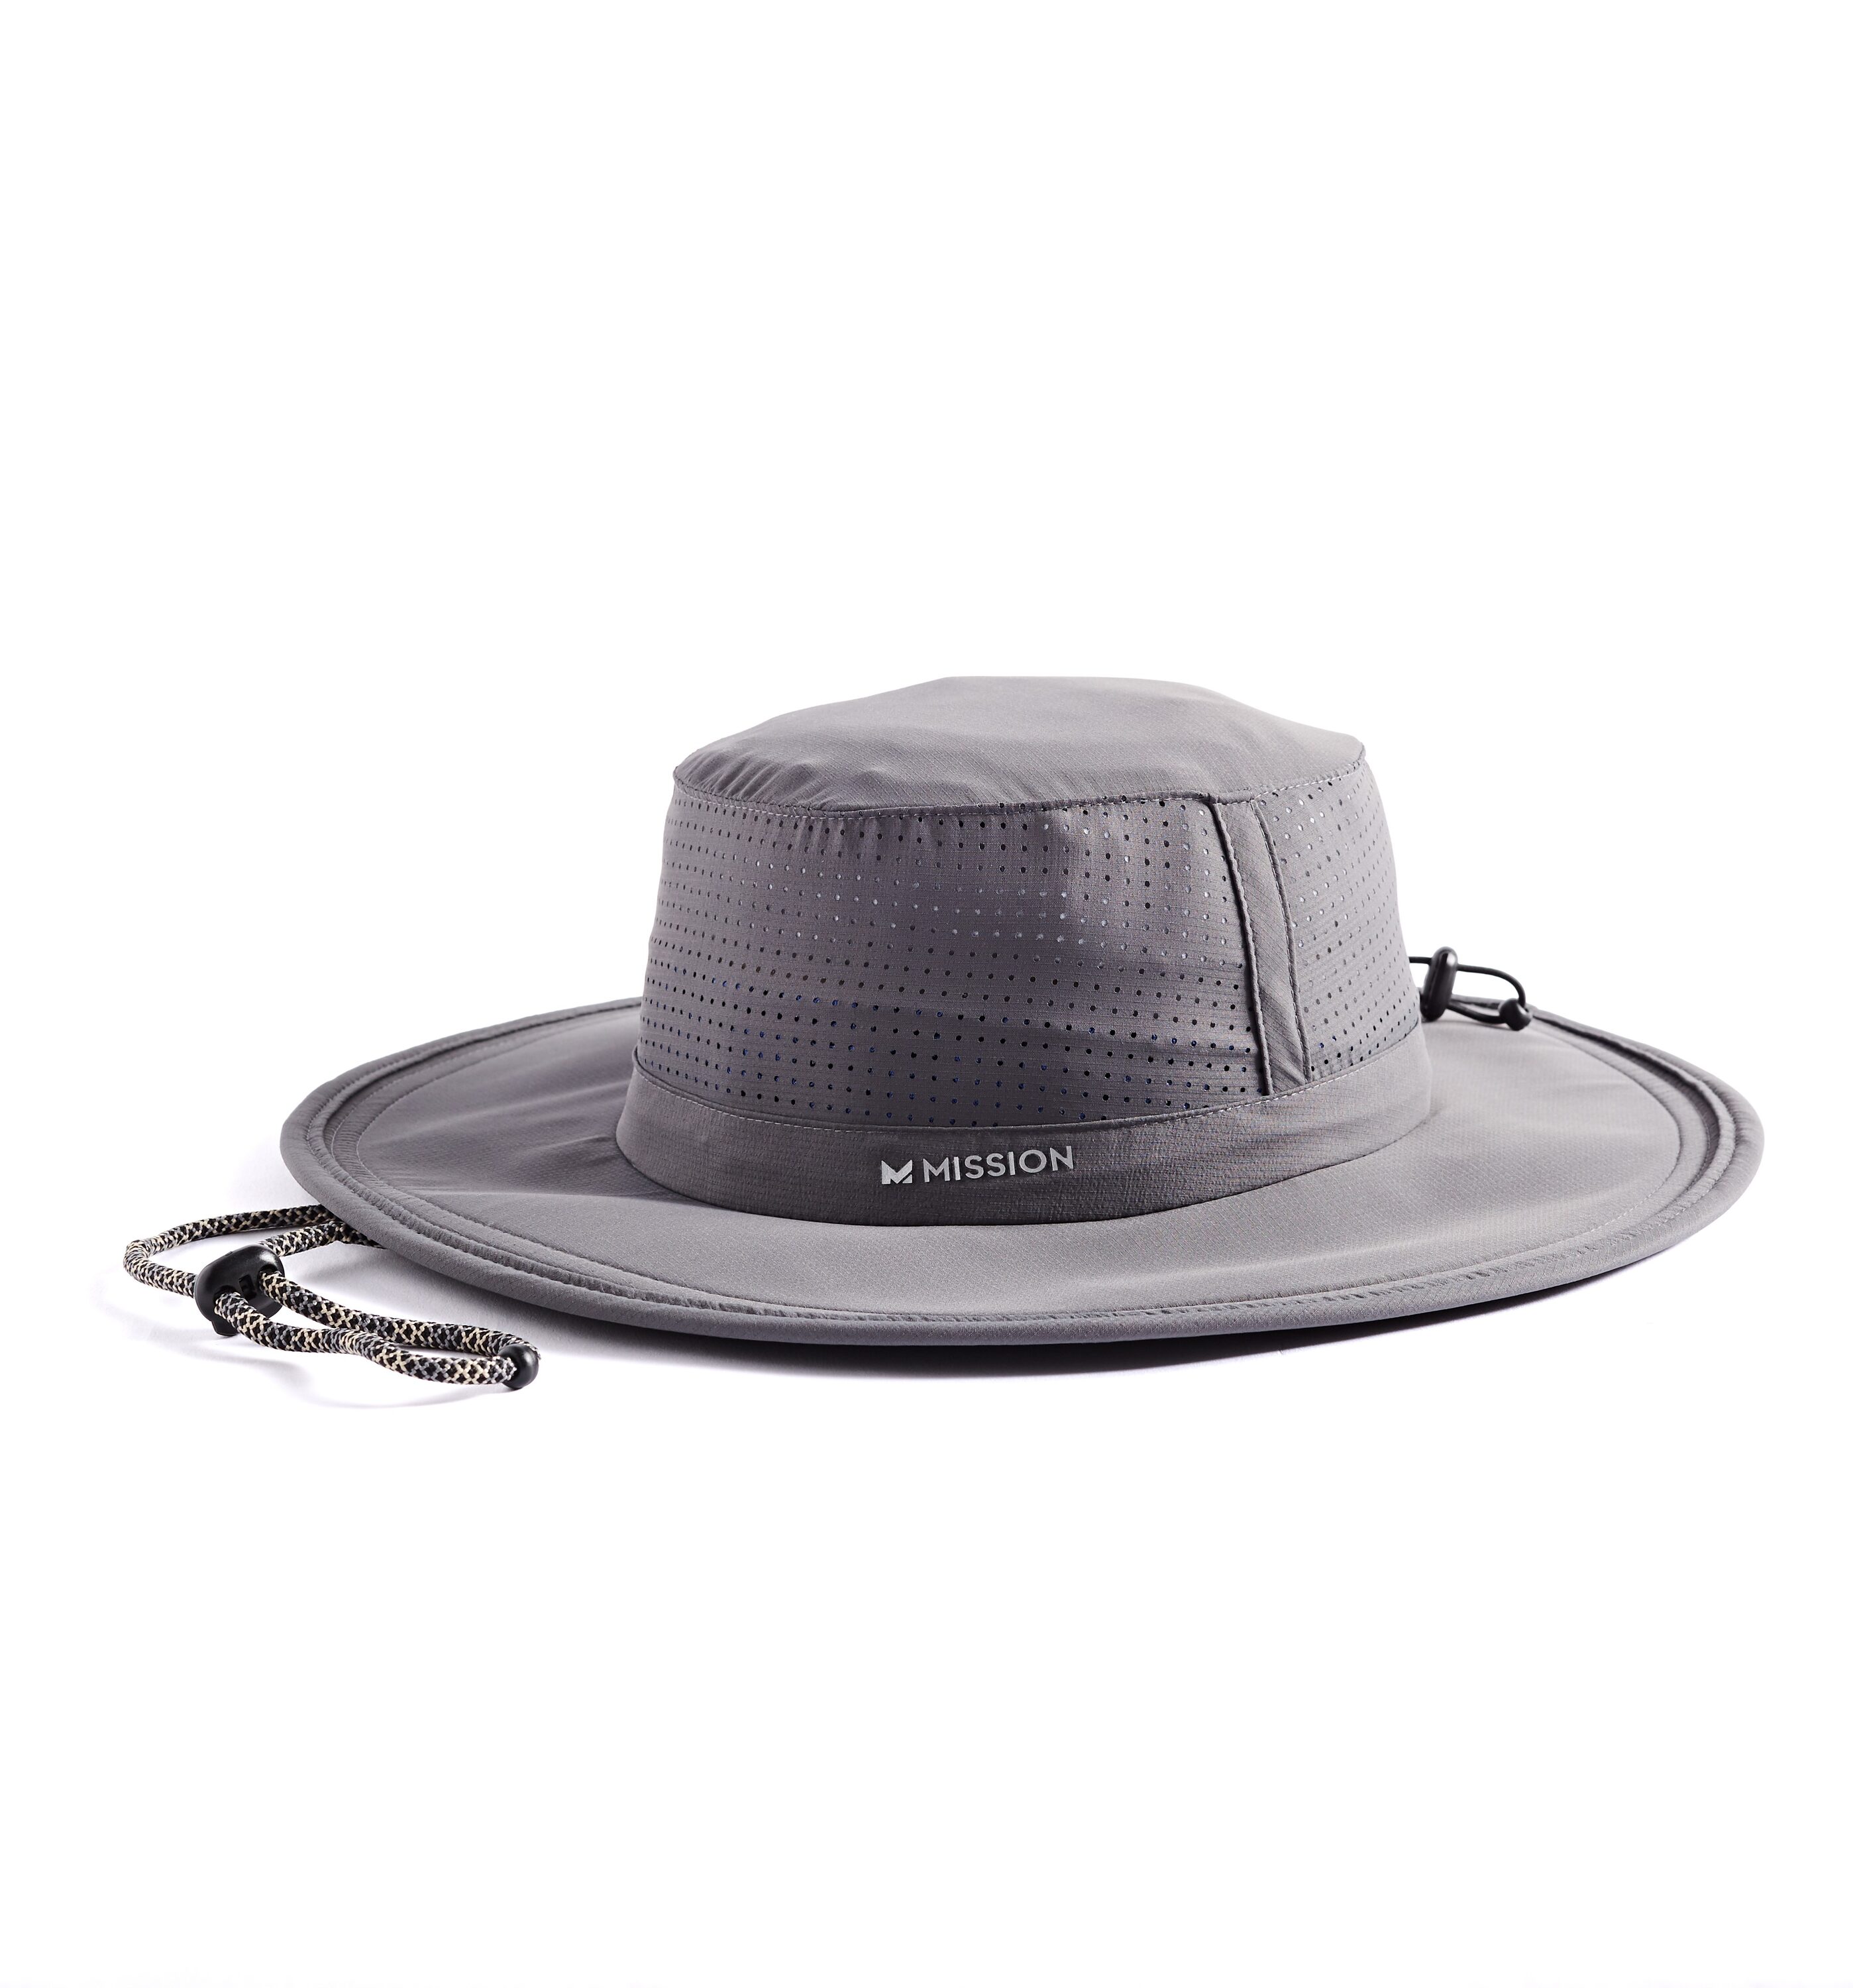 MISSION Cooling Bucket Hat for Men & Women, One Size, Sea Palm 